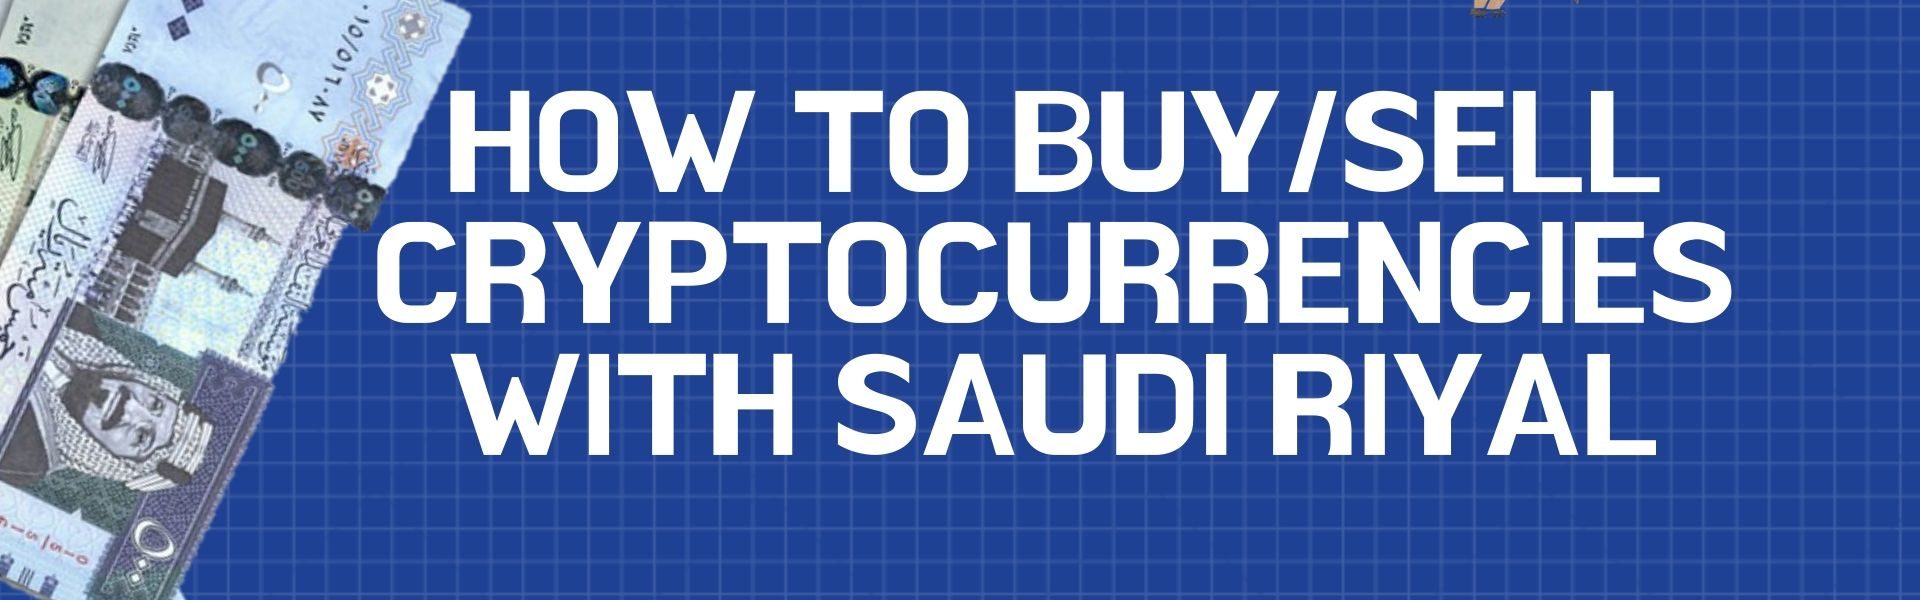 How to buy cryptocurrency in Saudi Arabia